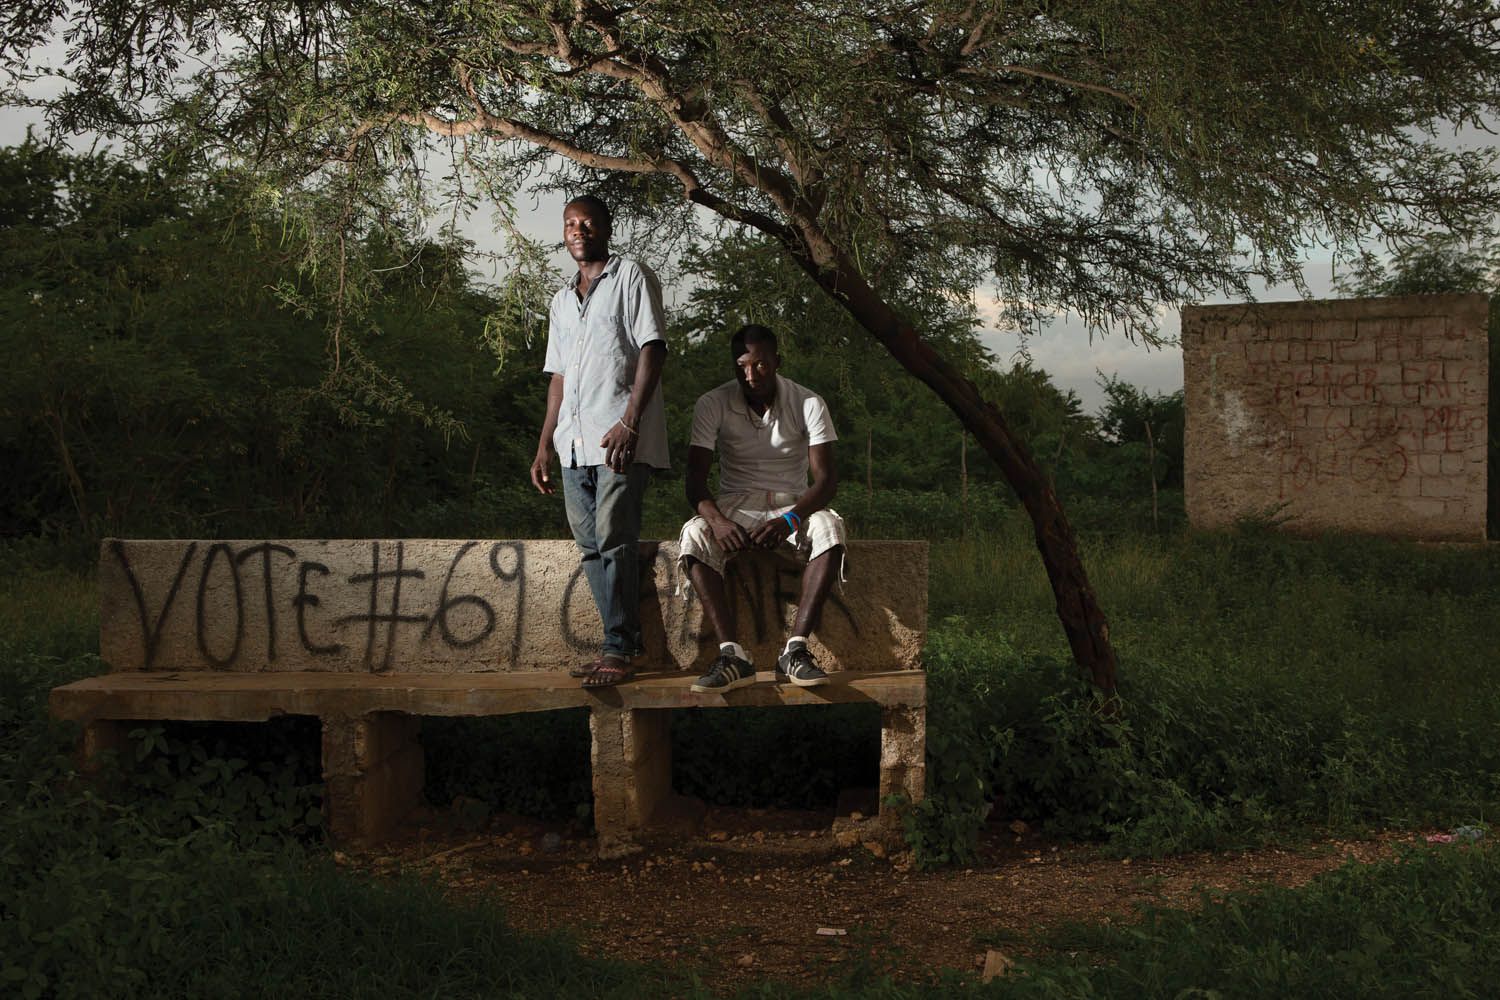 Evenson Louis (left) and Accene Appolon in a park they helped to preserve in the neighborhood of Canaan 1. Evenson actively protects greenspaces for the community. Image by Allison Shelley. Haiti, 2017.
